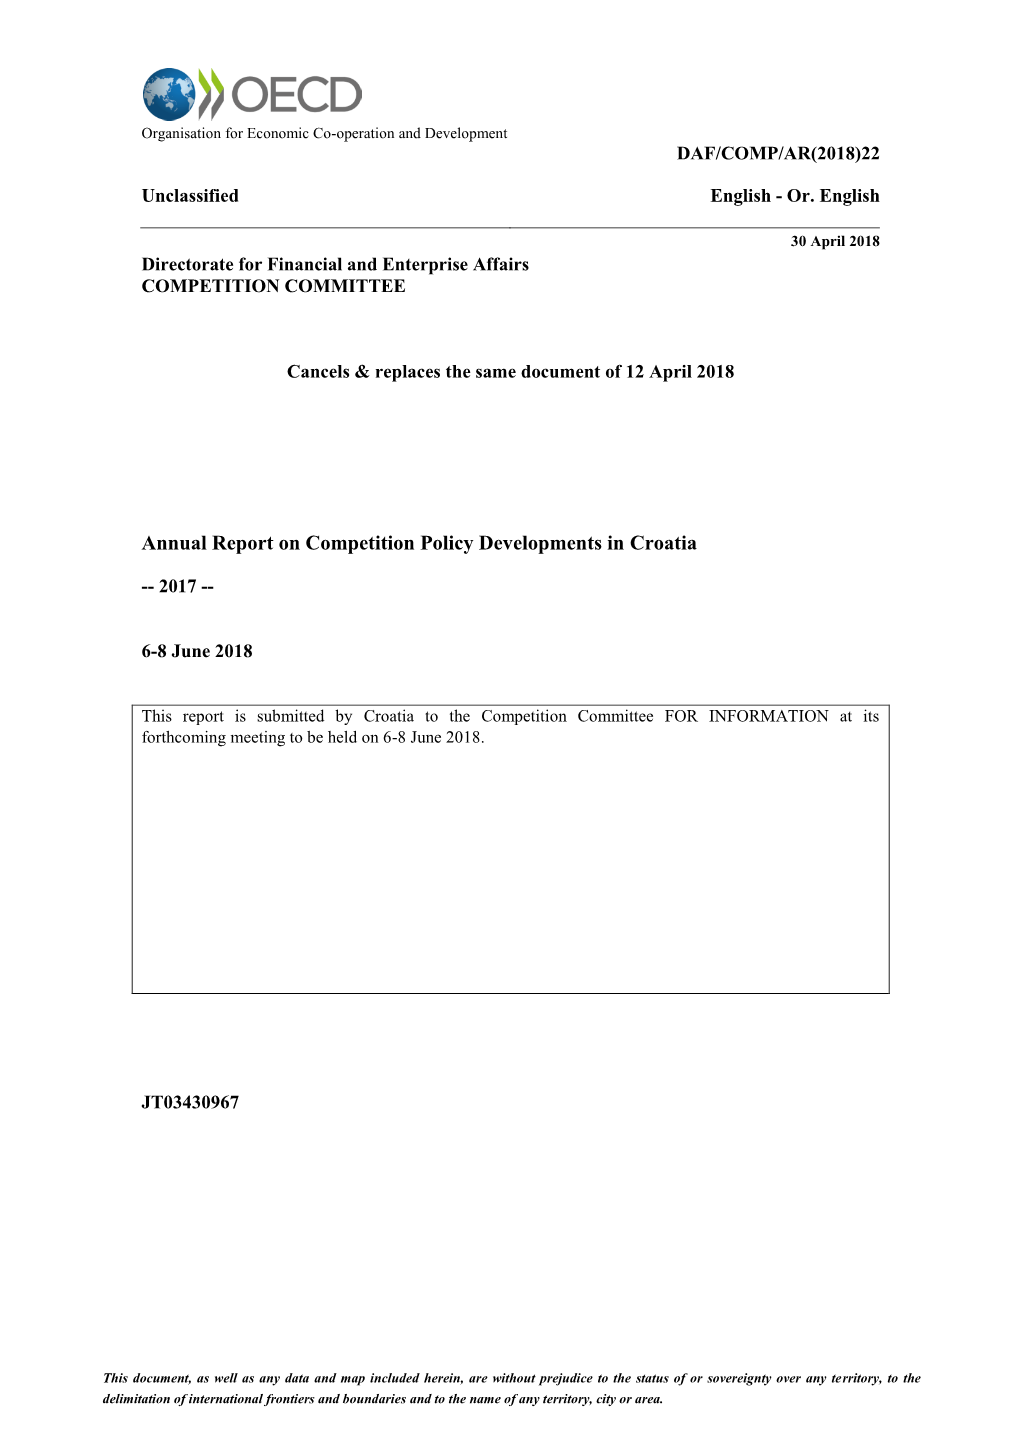 Annual Report on Competition Policy Developments in Croatia